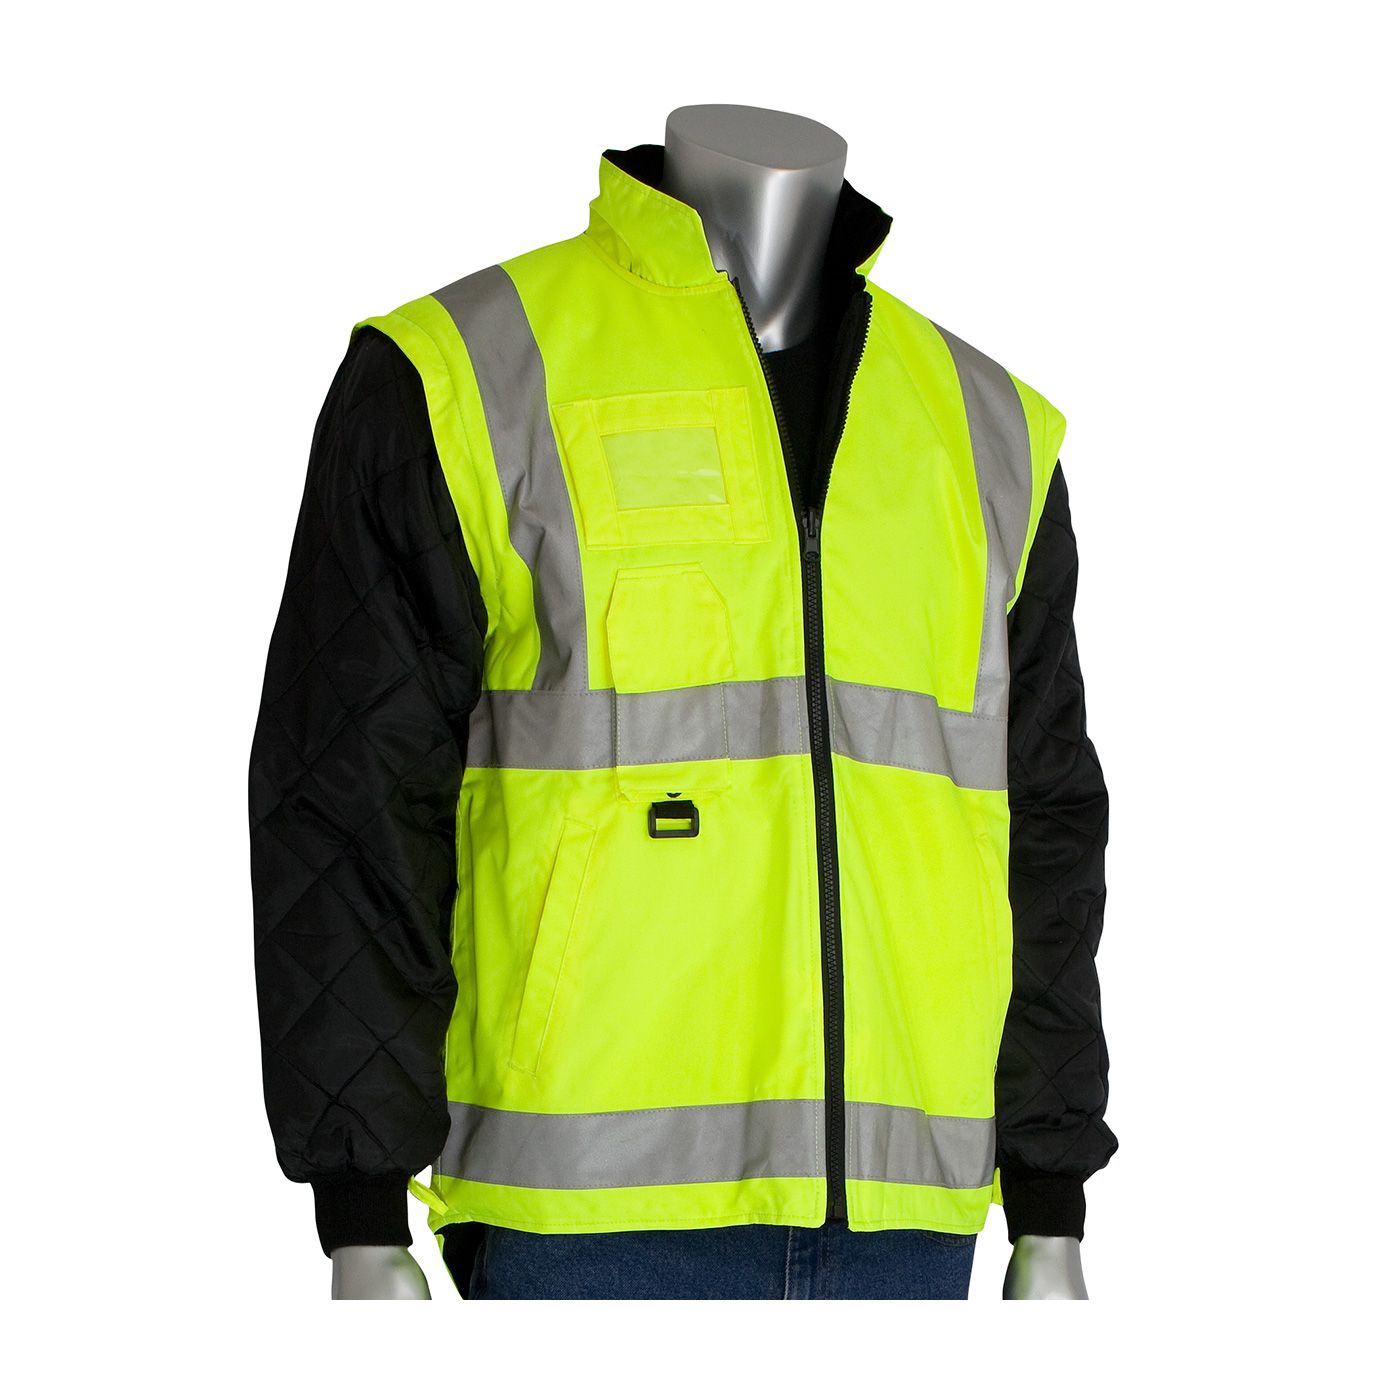 PIP ANSI TYPE R CLASS 3 ALL CONDITIONS 7 IN 1 COAT CLASS 2 INNER JACKET AND VEST COMBINATION Yellow 1 EA